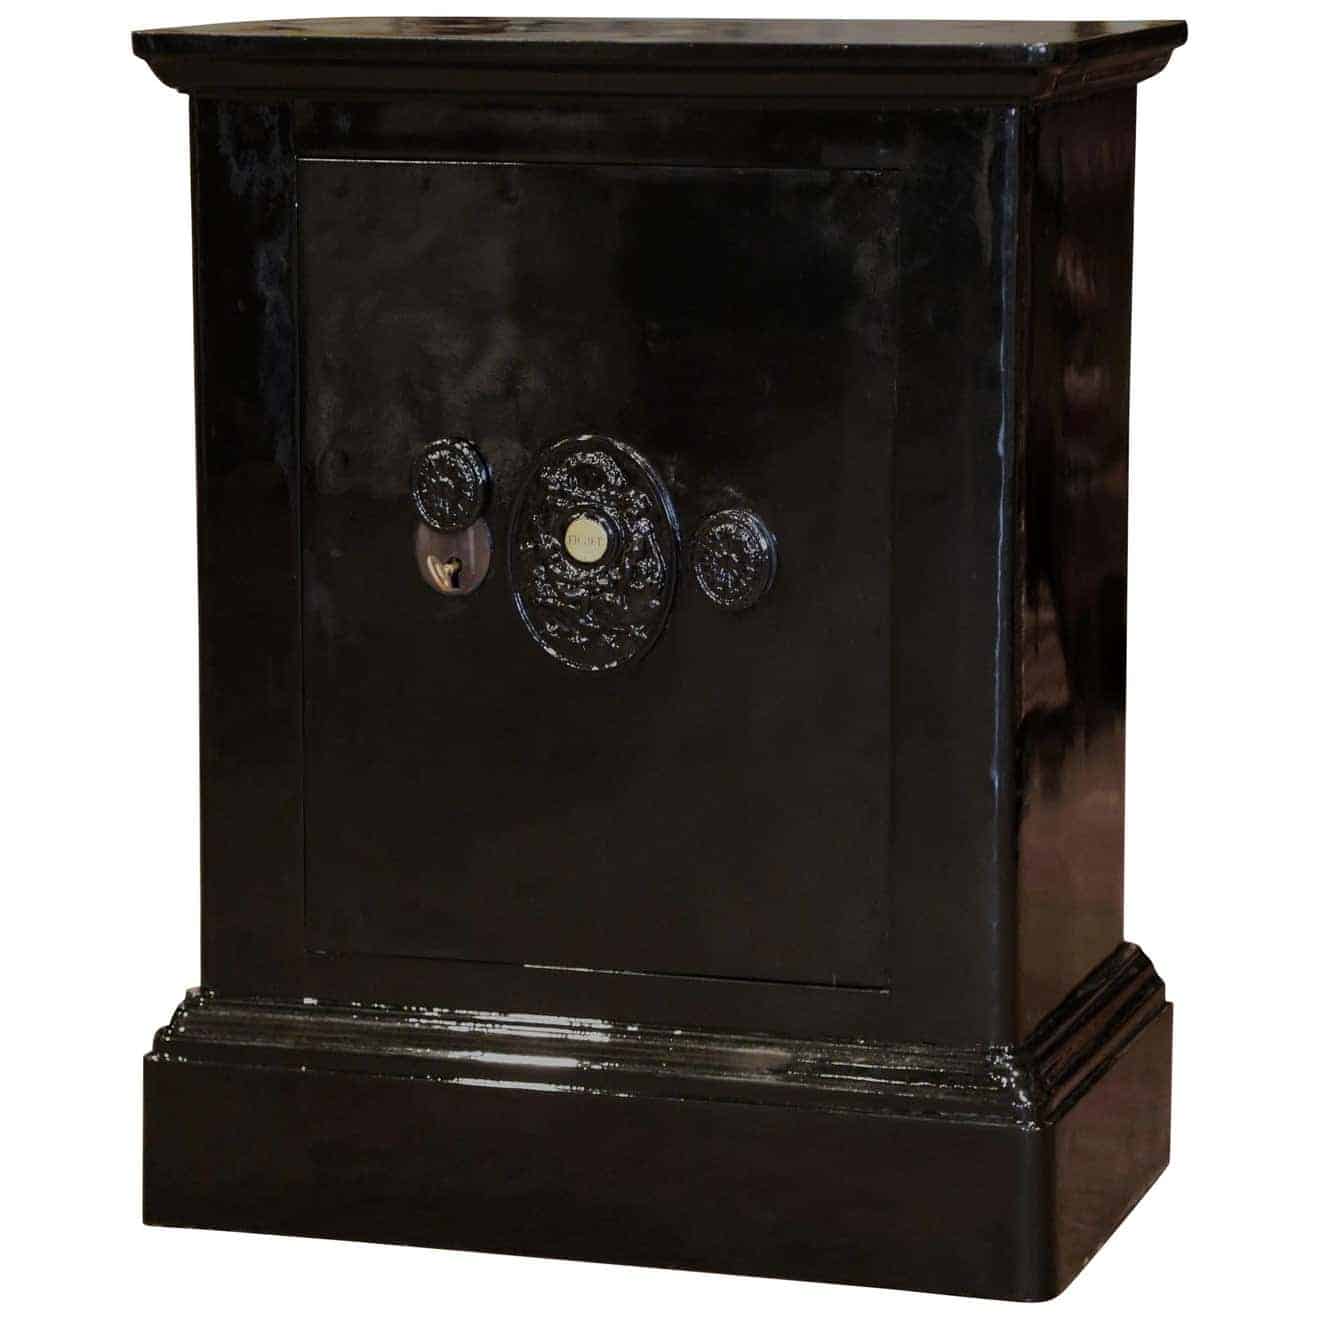 French metallic black Fichet Fire safe from the 17th century